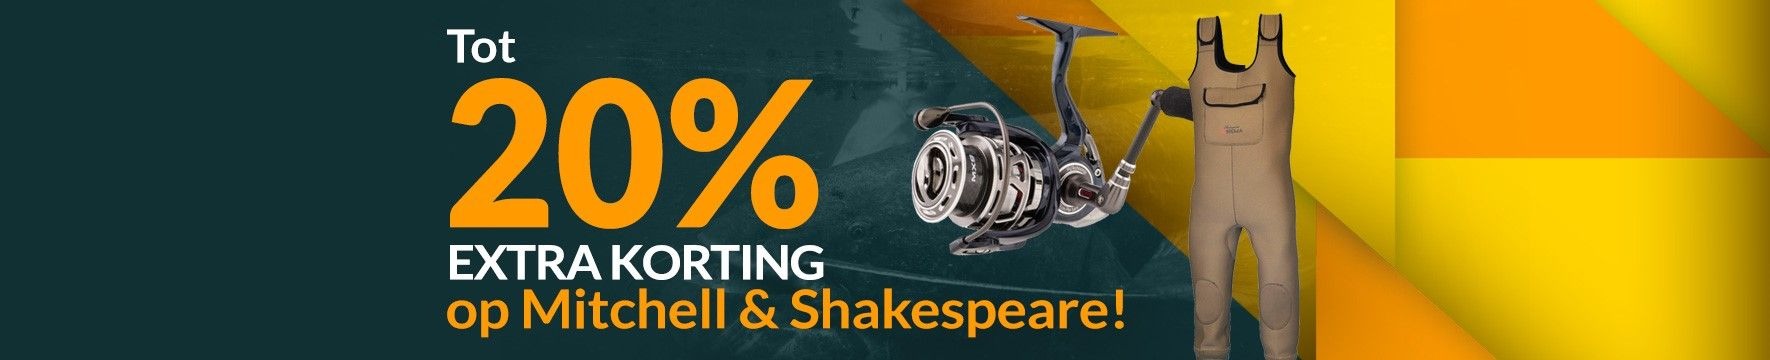 Category topbanner: Tot 20% Mitchell & Shakespeare